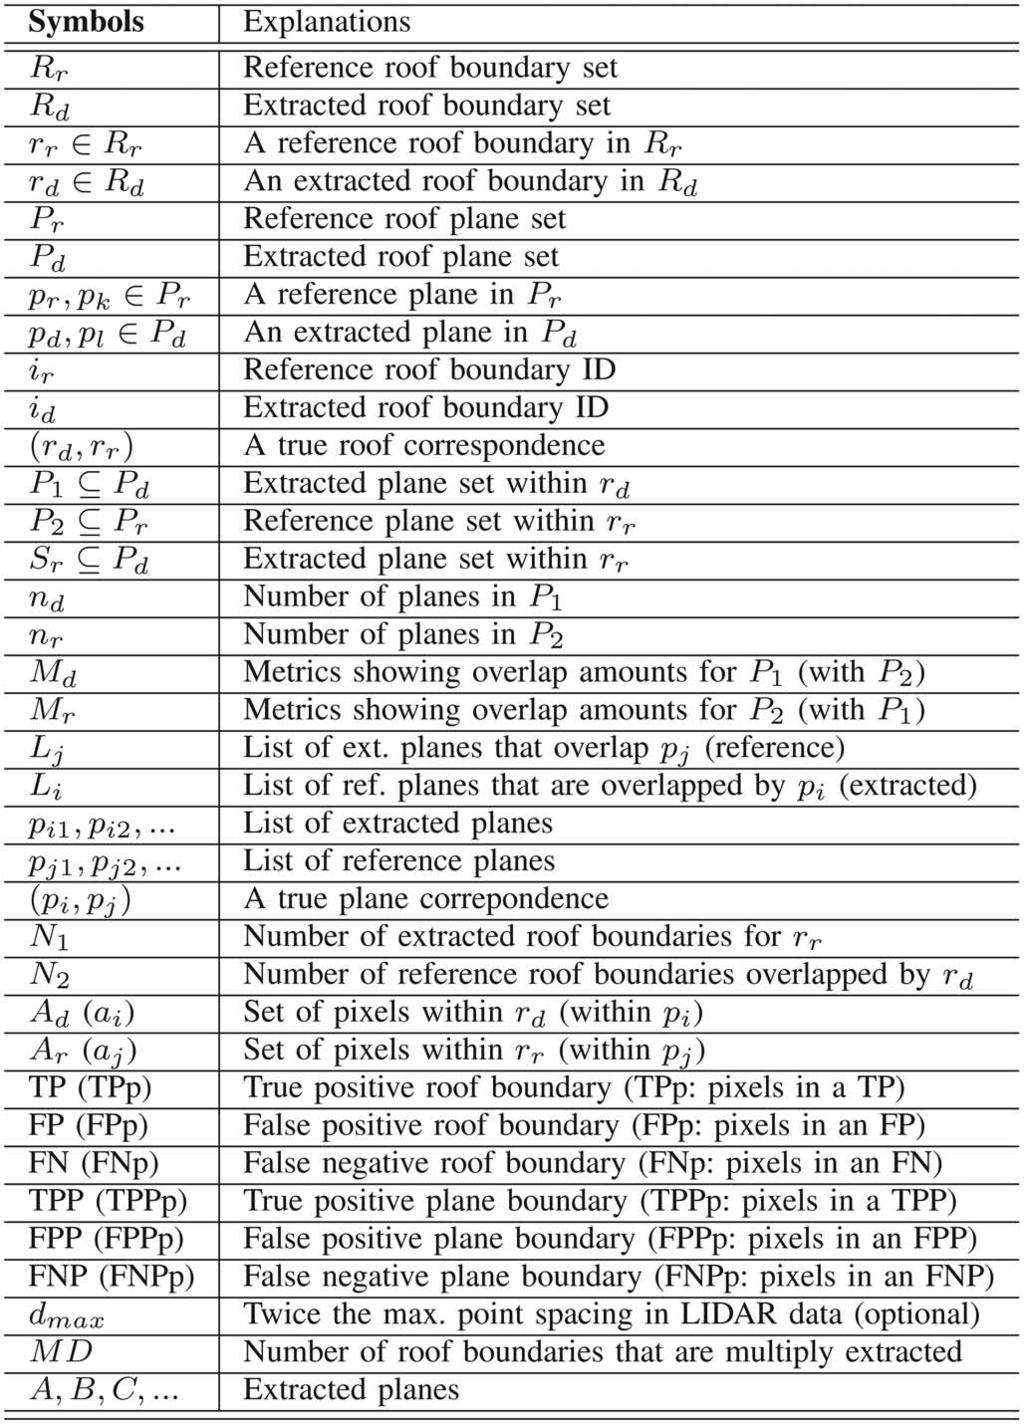 6 IEEE JOURNAL OF SELECTED TOPICS IN APPLIED EARTH OBSERVATIONS AND REMOTE SENSING TABLE I SYMBOLS USED IN SECTION IV Fig. 6.